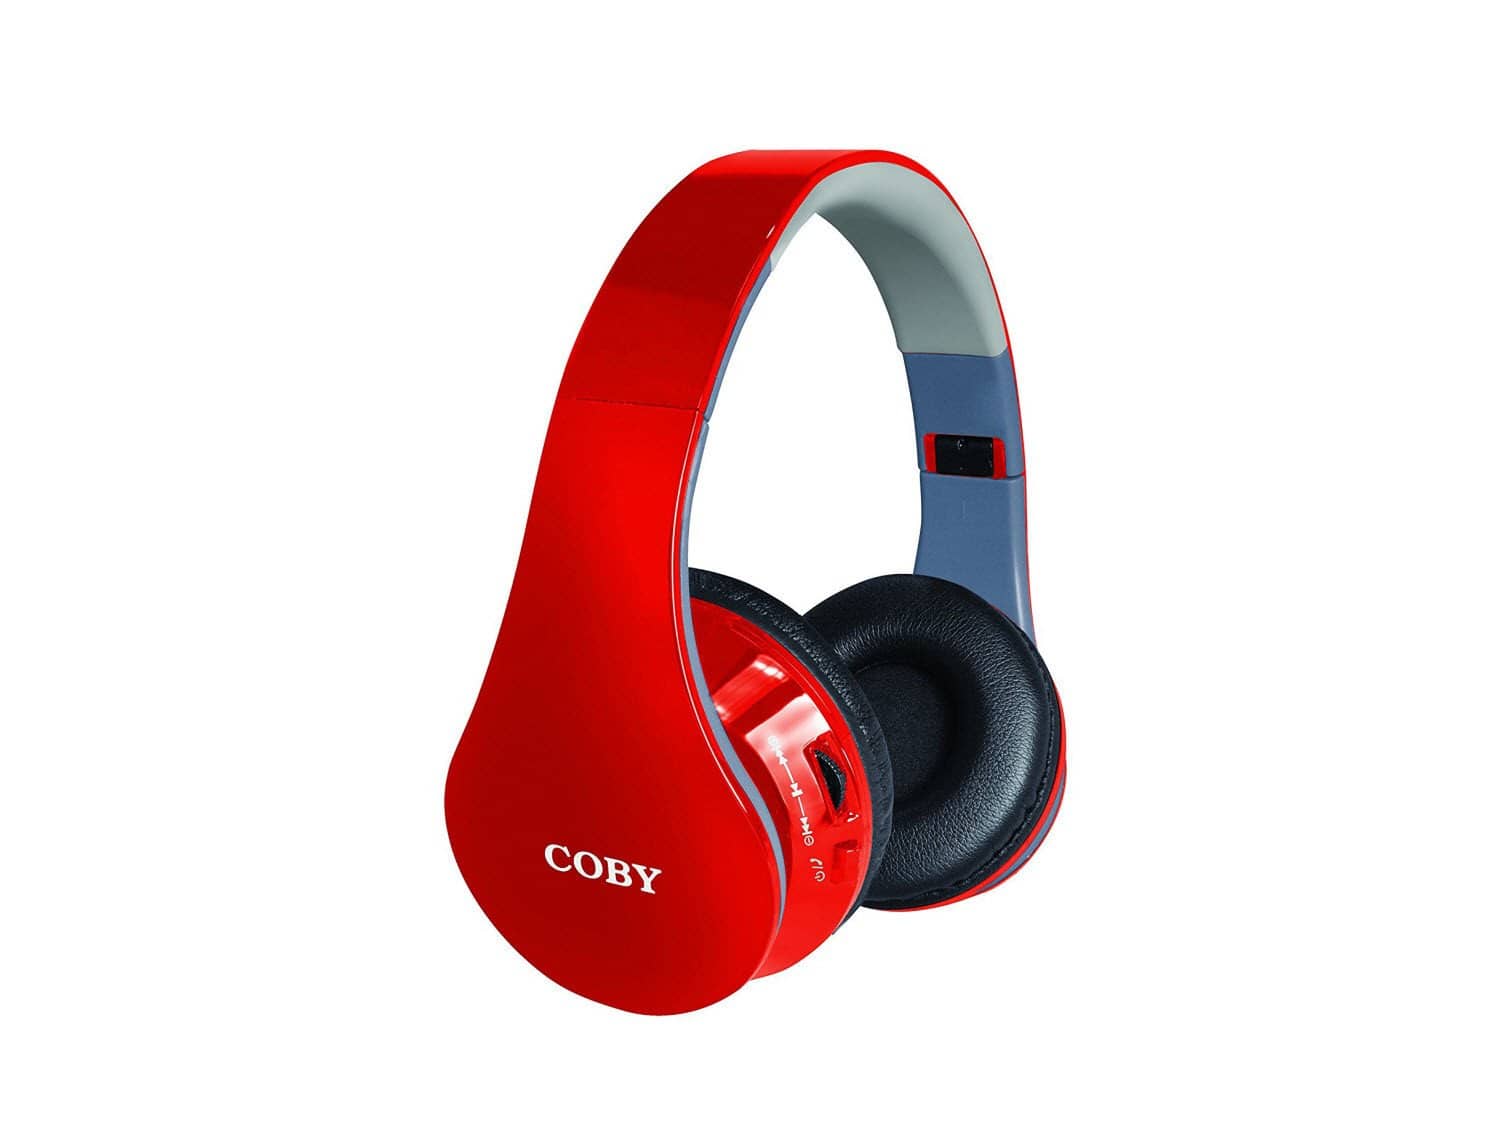 Coby CHBT-701-Red Contour Bluetooth Stereo Headphones - Red